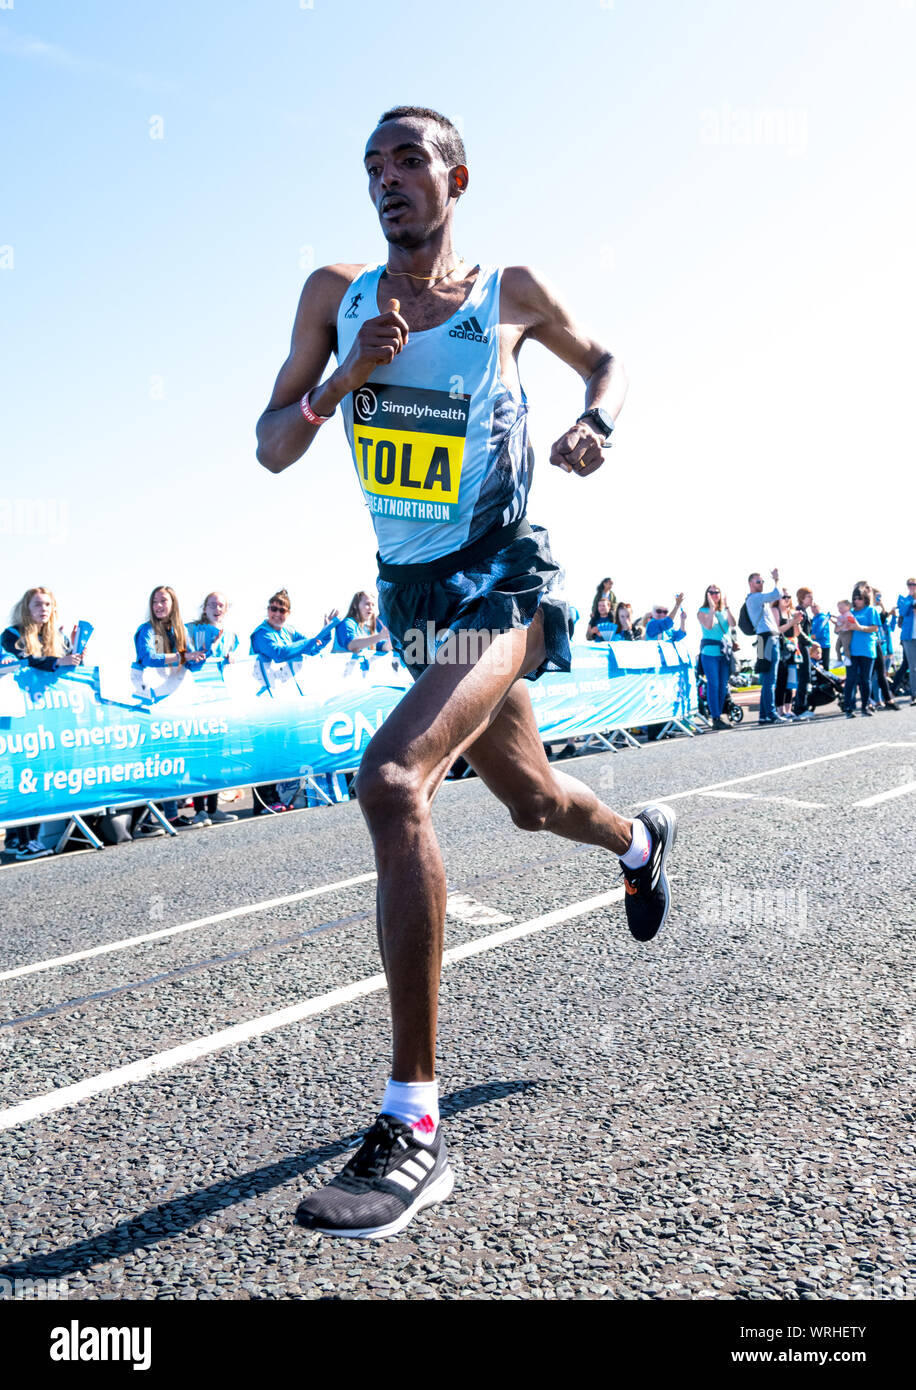 Mens elite runner Tamarit Tola competing in the 2019 Great North Run from Newcastle to South Shields, England, UK Stock Photo